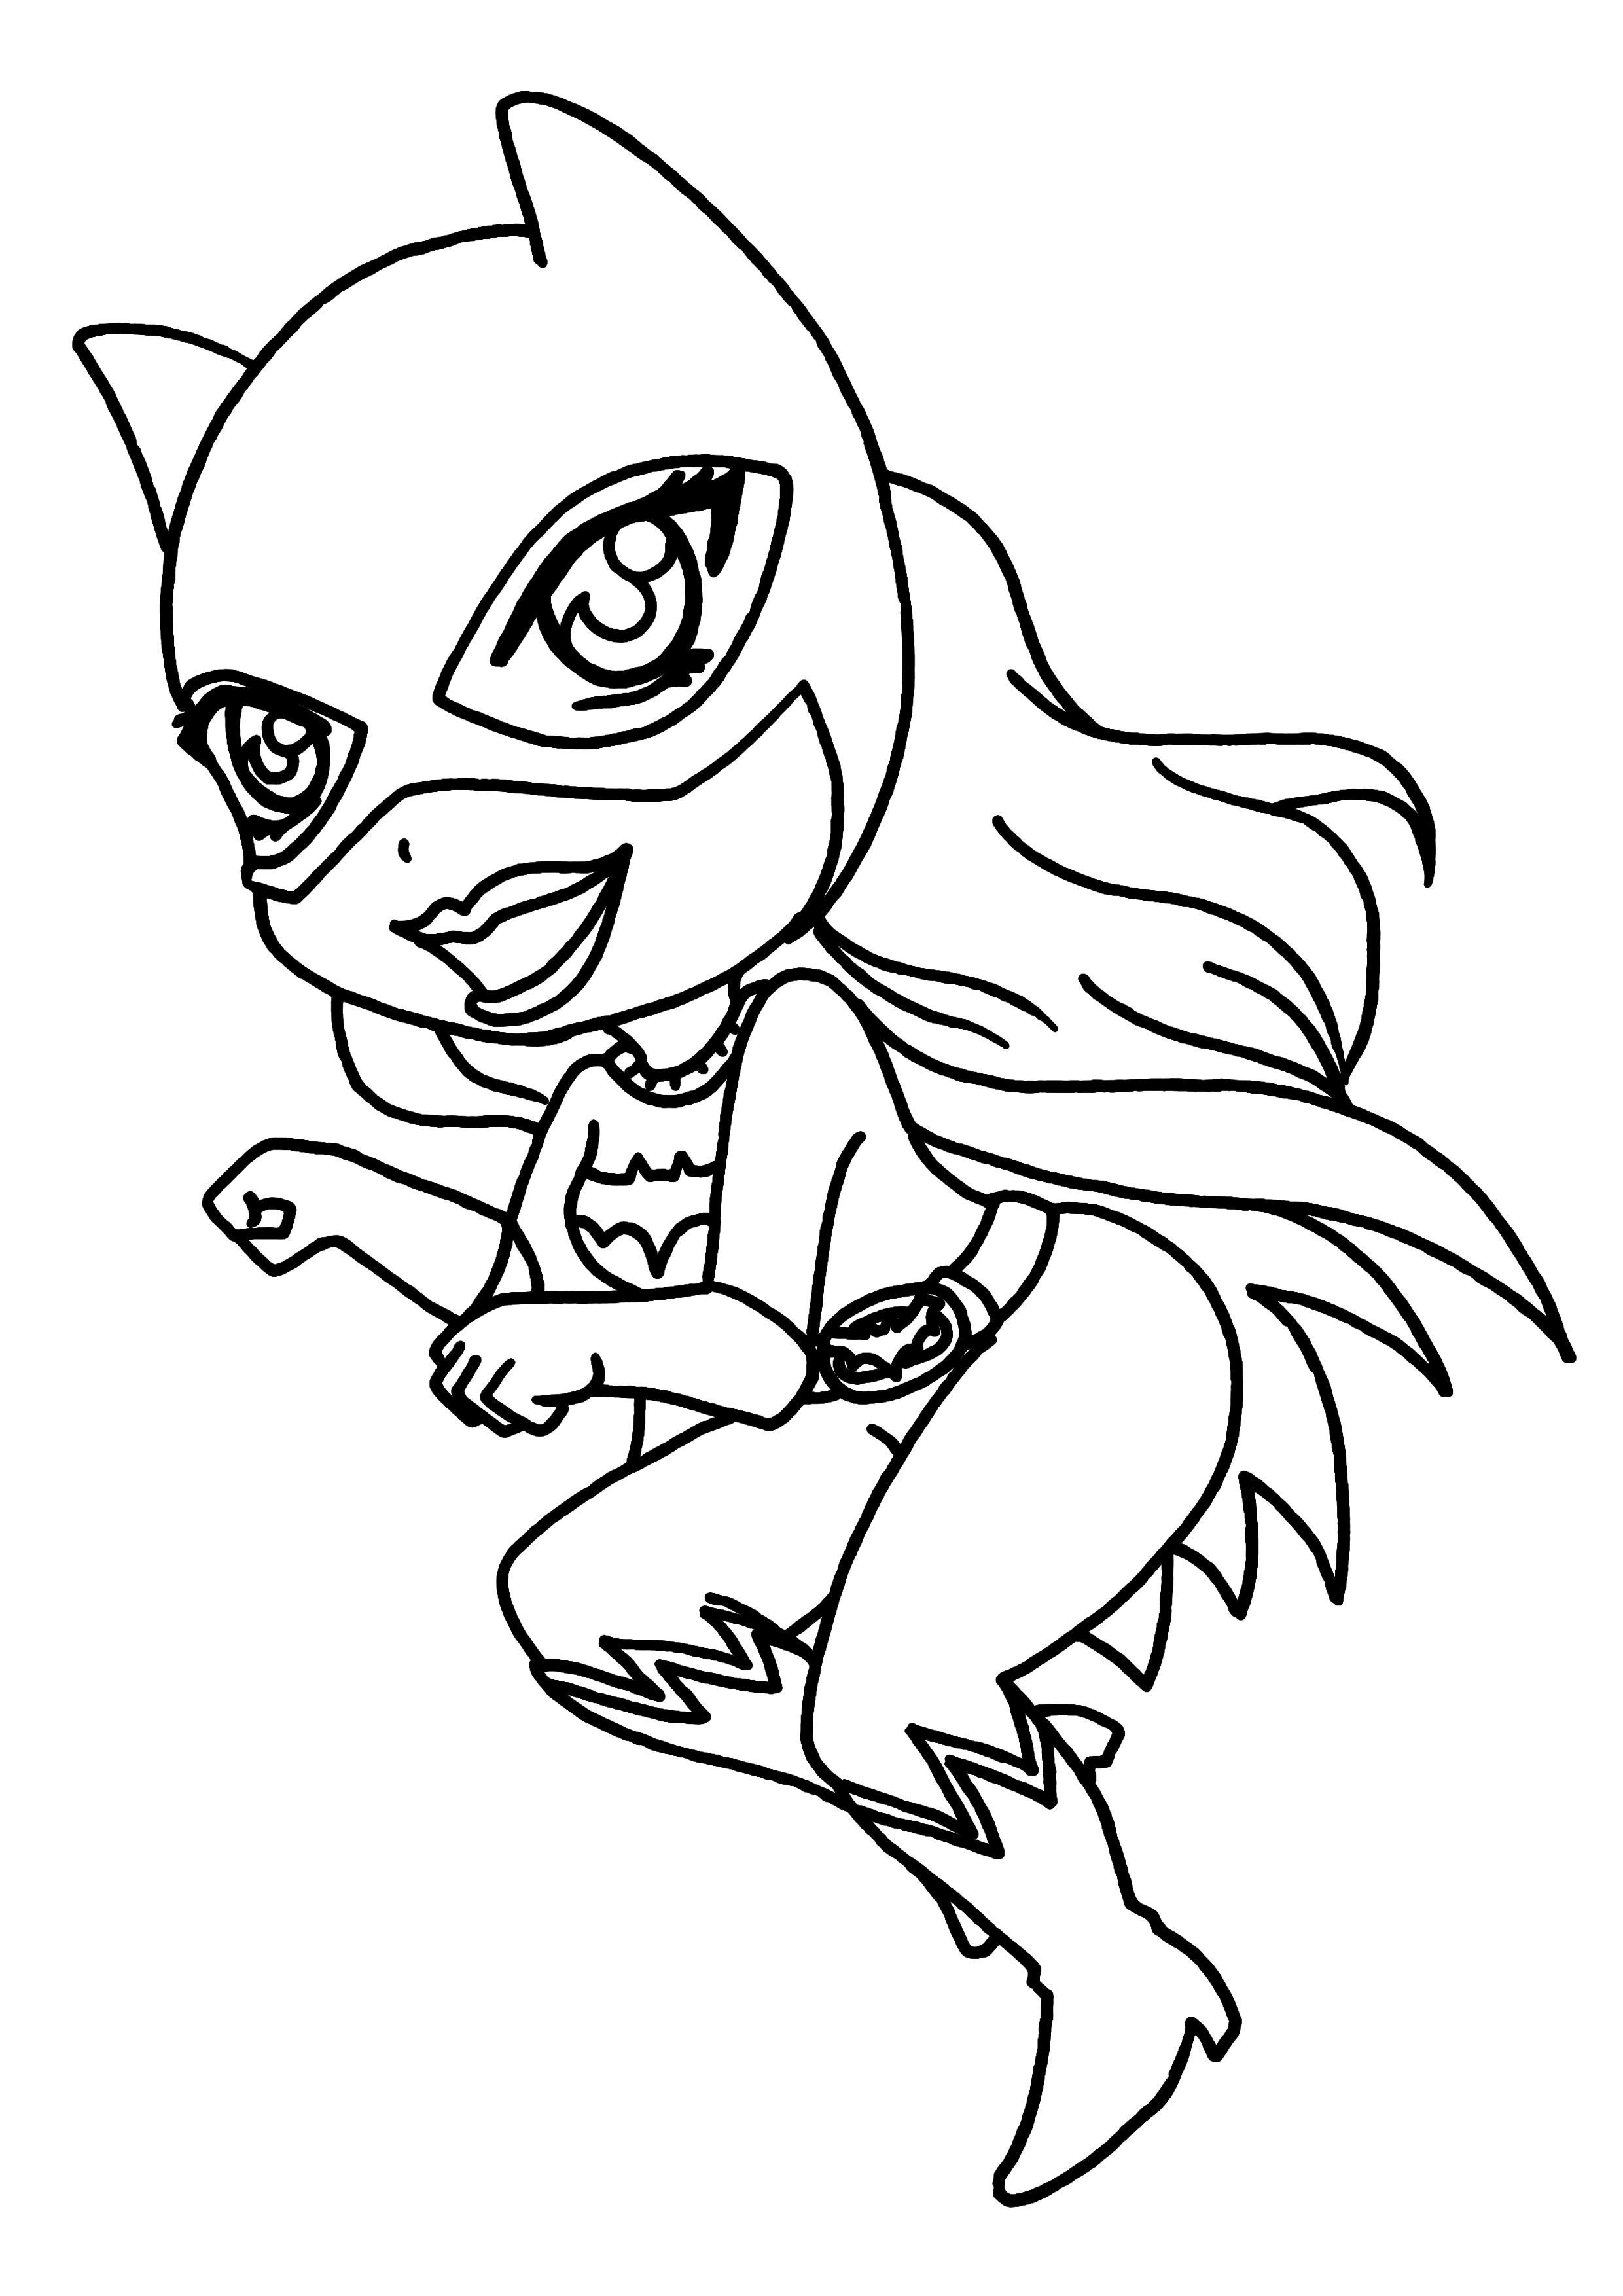 catwoman coloring page catwoman coloring pages coloring pages to download and print page catwoman coloring 